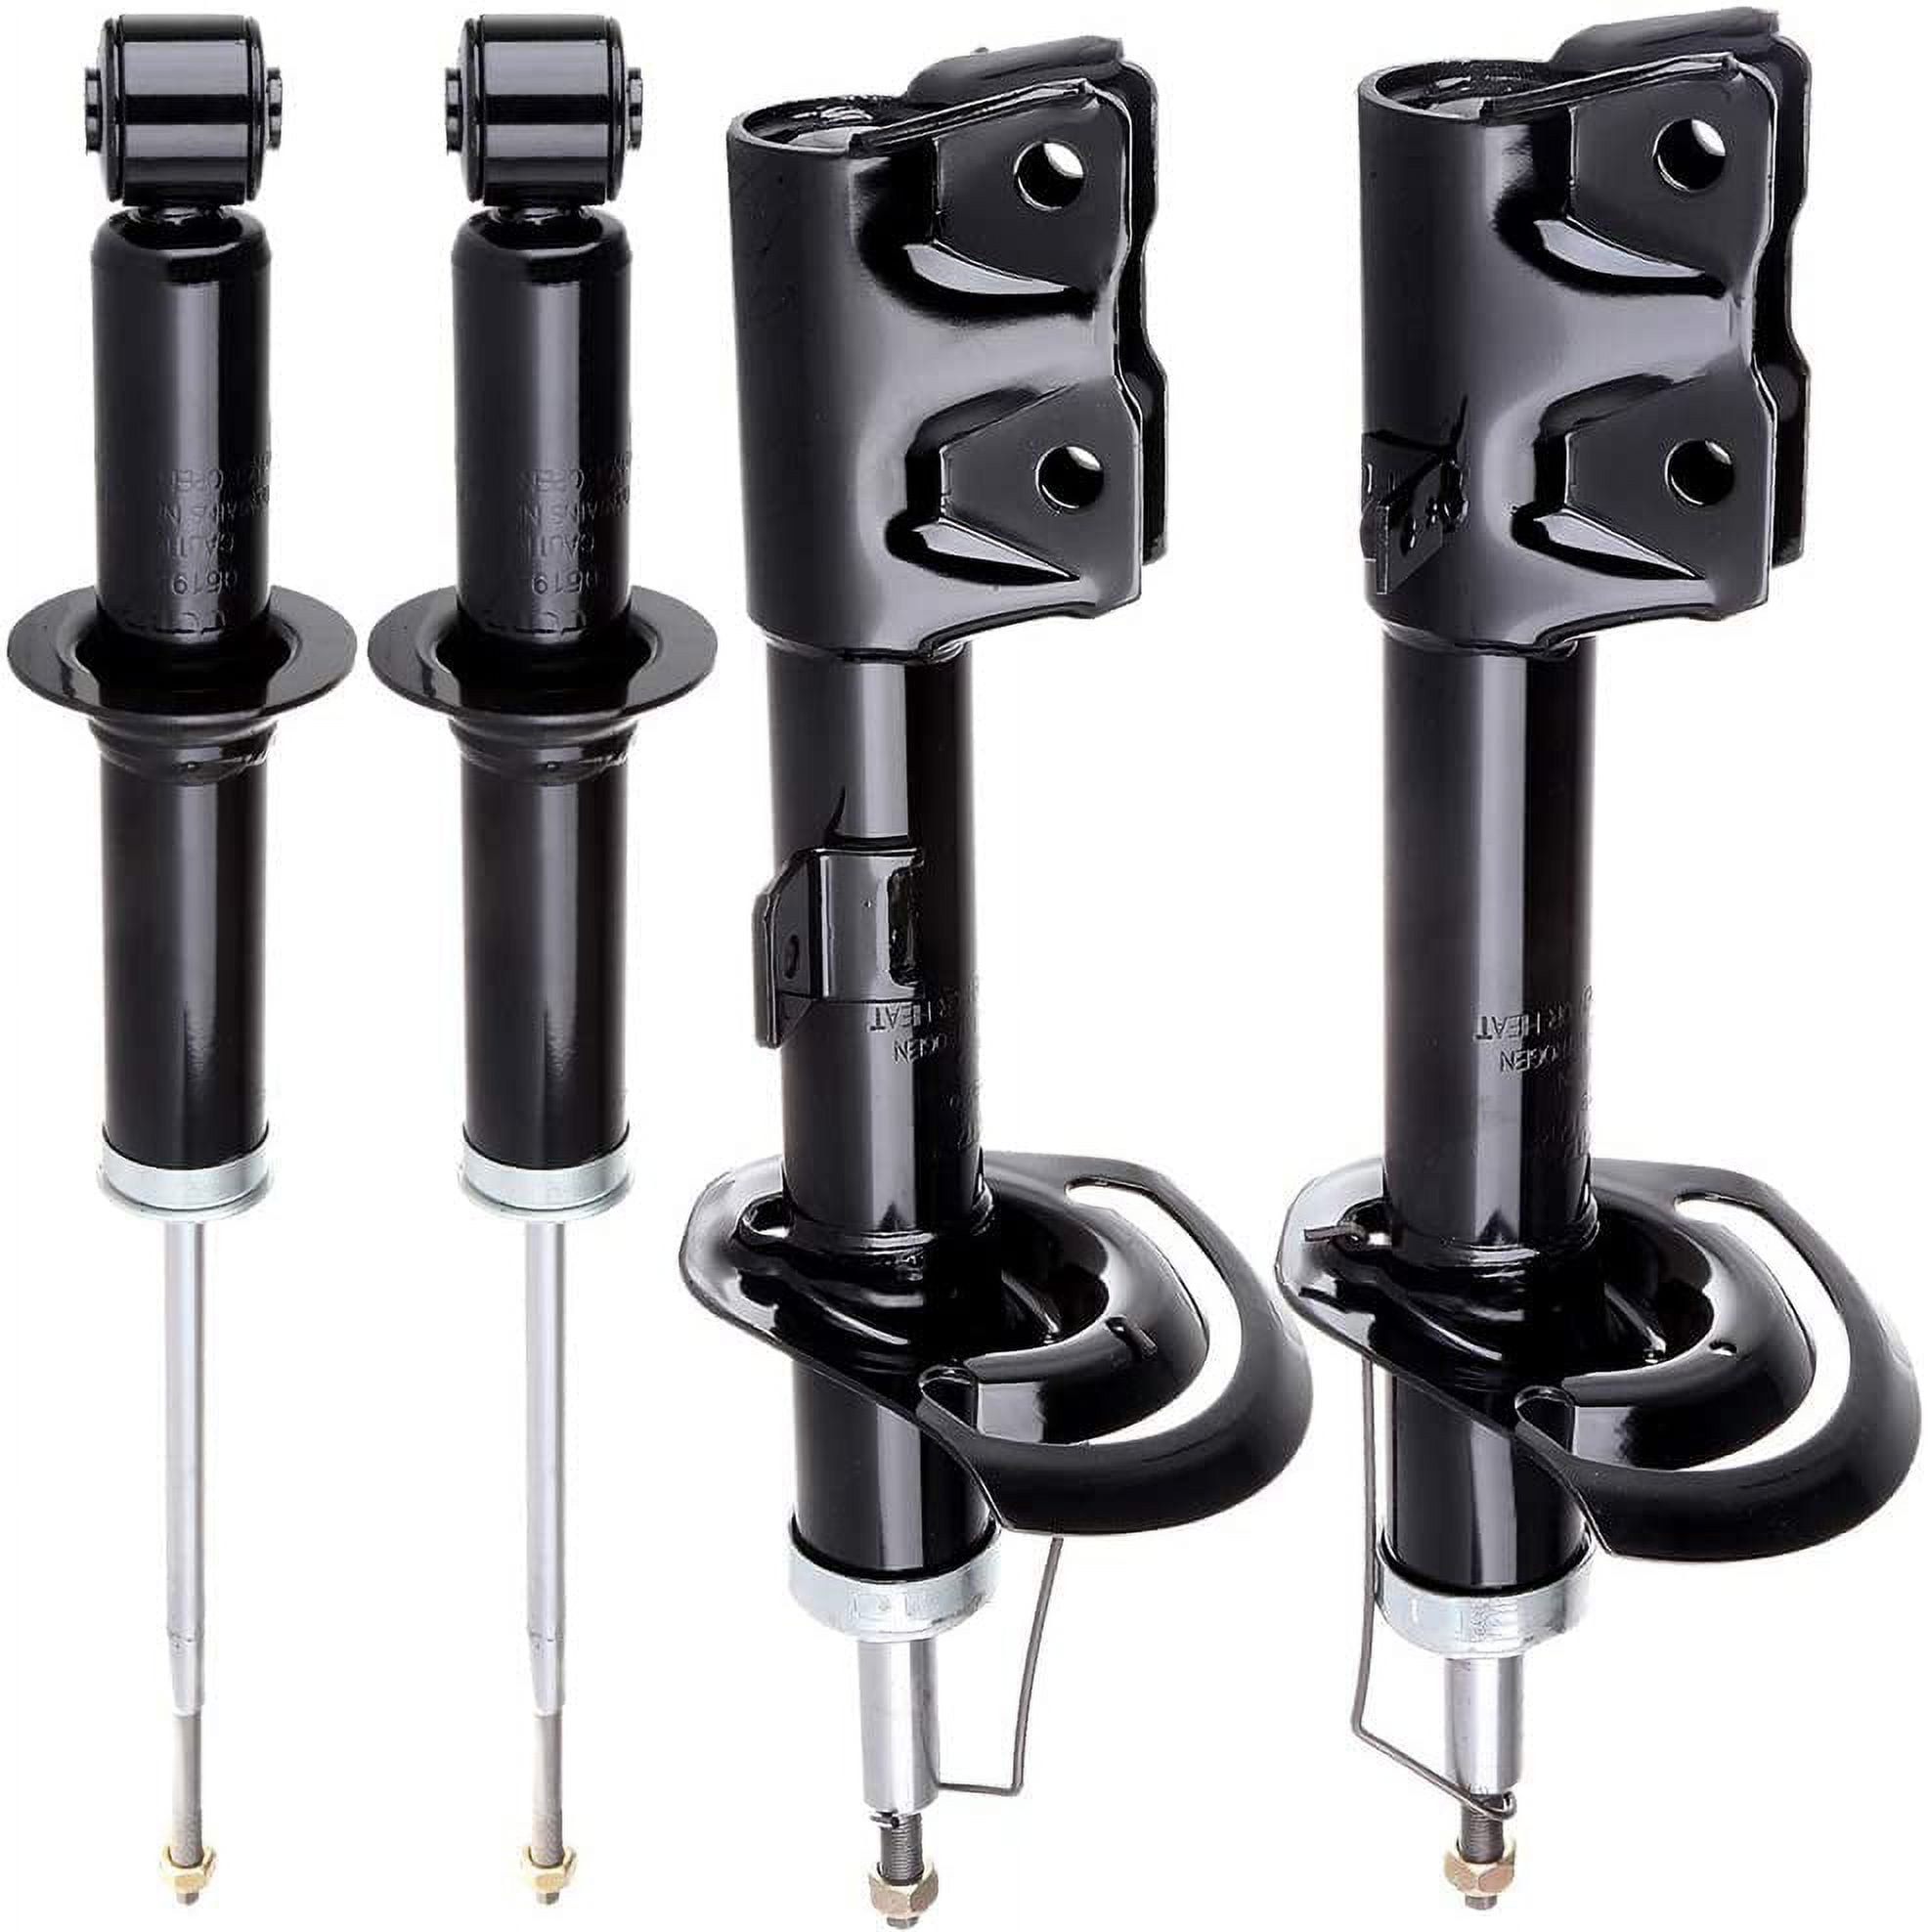 Shocks,SCITOO Front Rear Gas Struts Shock Absorbers Fit for 2007